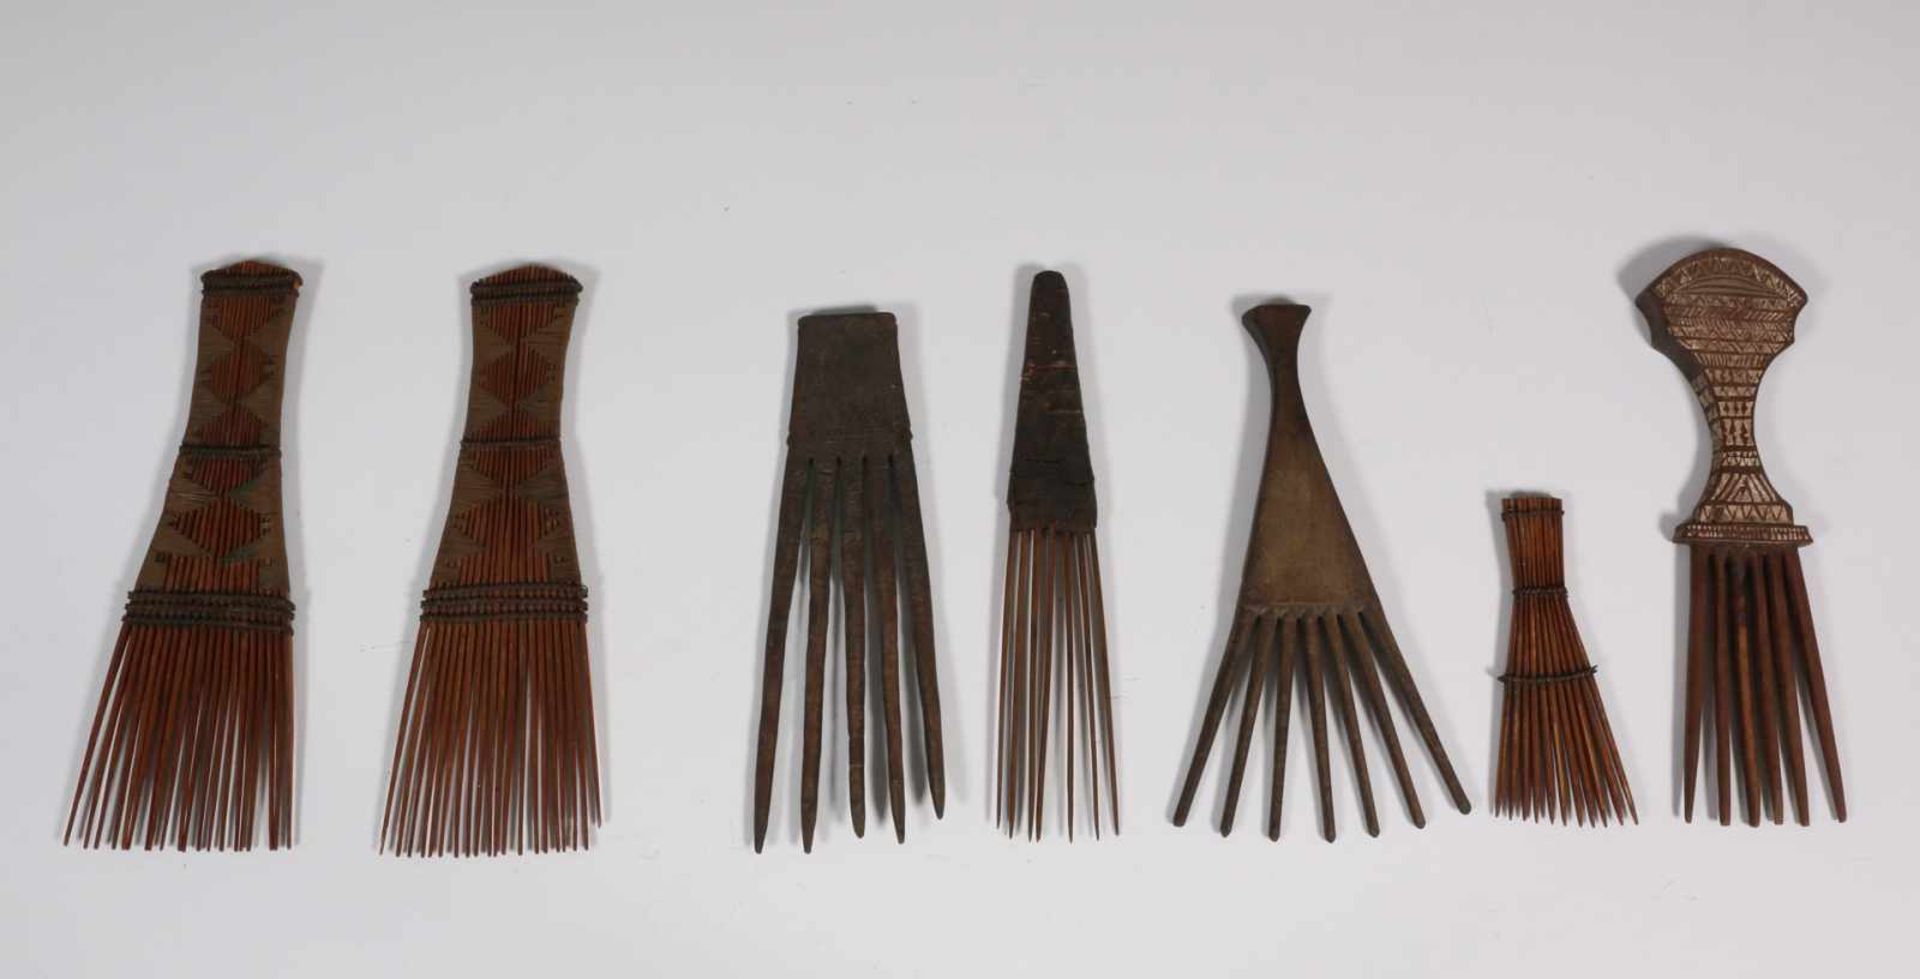 A collection of seven various combs, h. 12 - 23 cm. [7]200